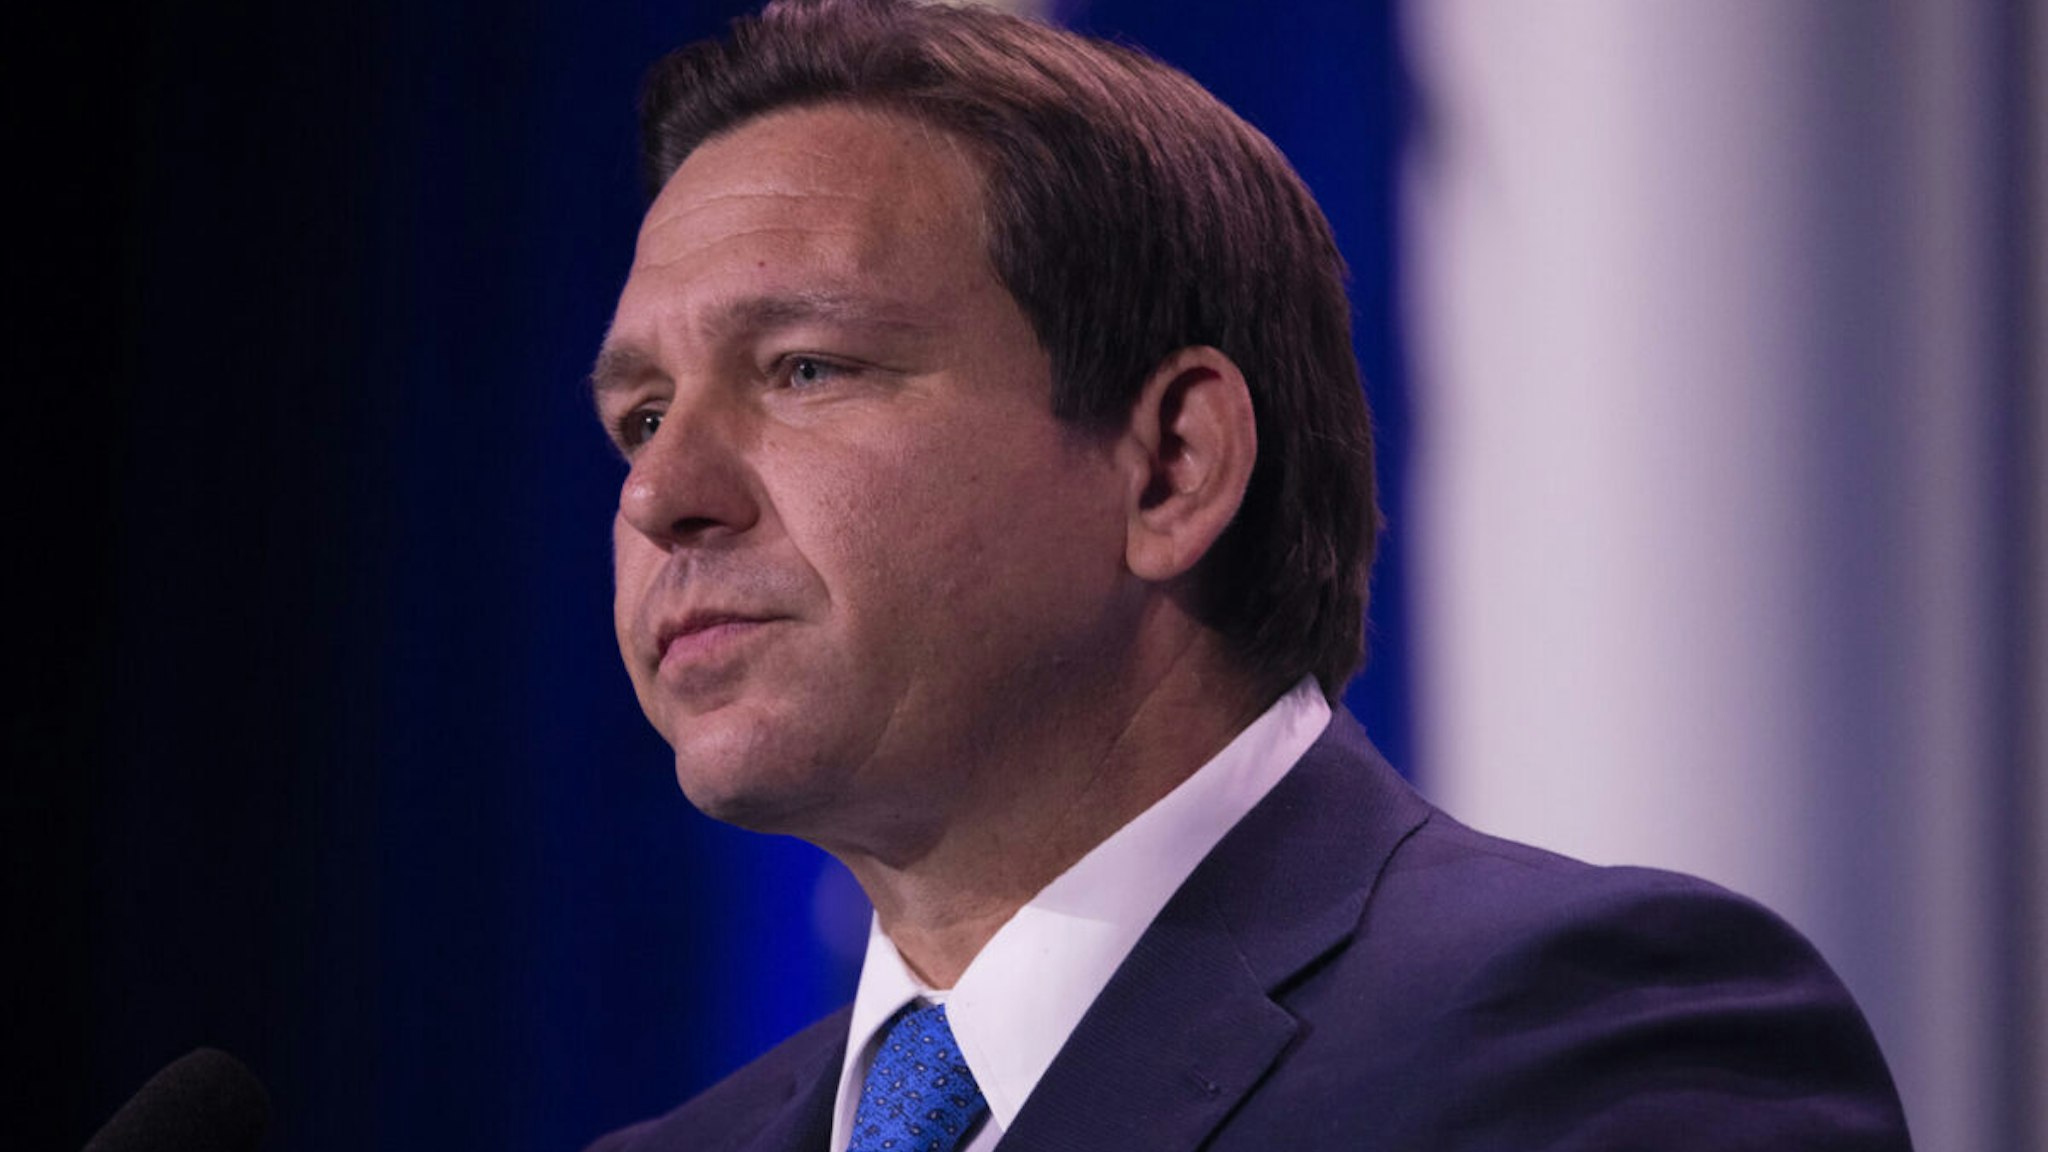 Florida Governor Ron DeSantis speaks to the Republican Jewish Coalition annual meeting at the Venetian in Las Vegas, Nevada on November 19, 2022